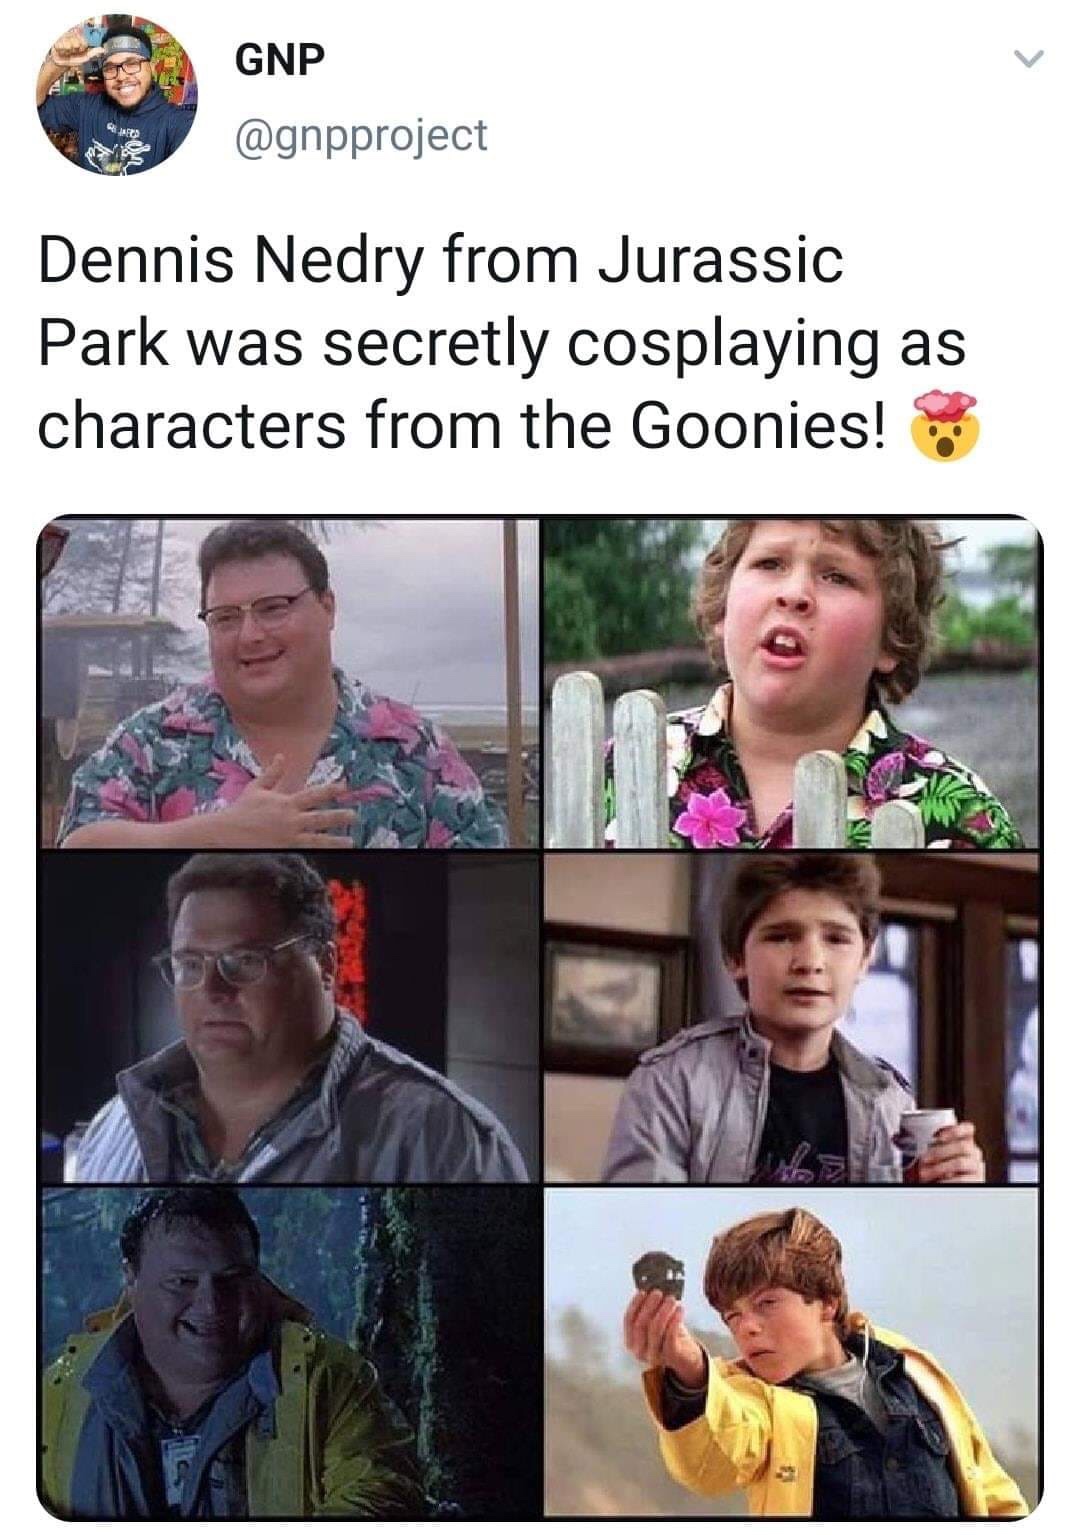 jurassic park goonies - Gnp Dennis Nedry from Jurassic Park was secretly cosplaying as characters from the Goonies!